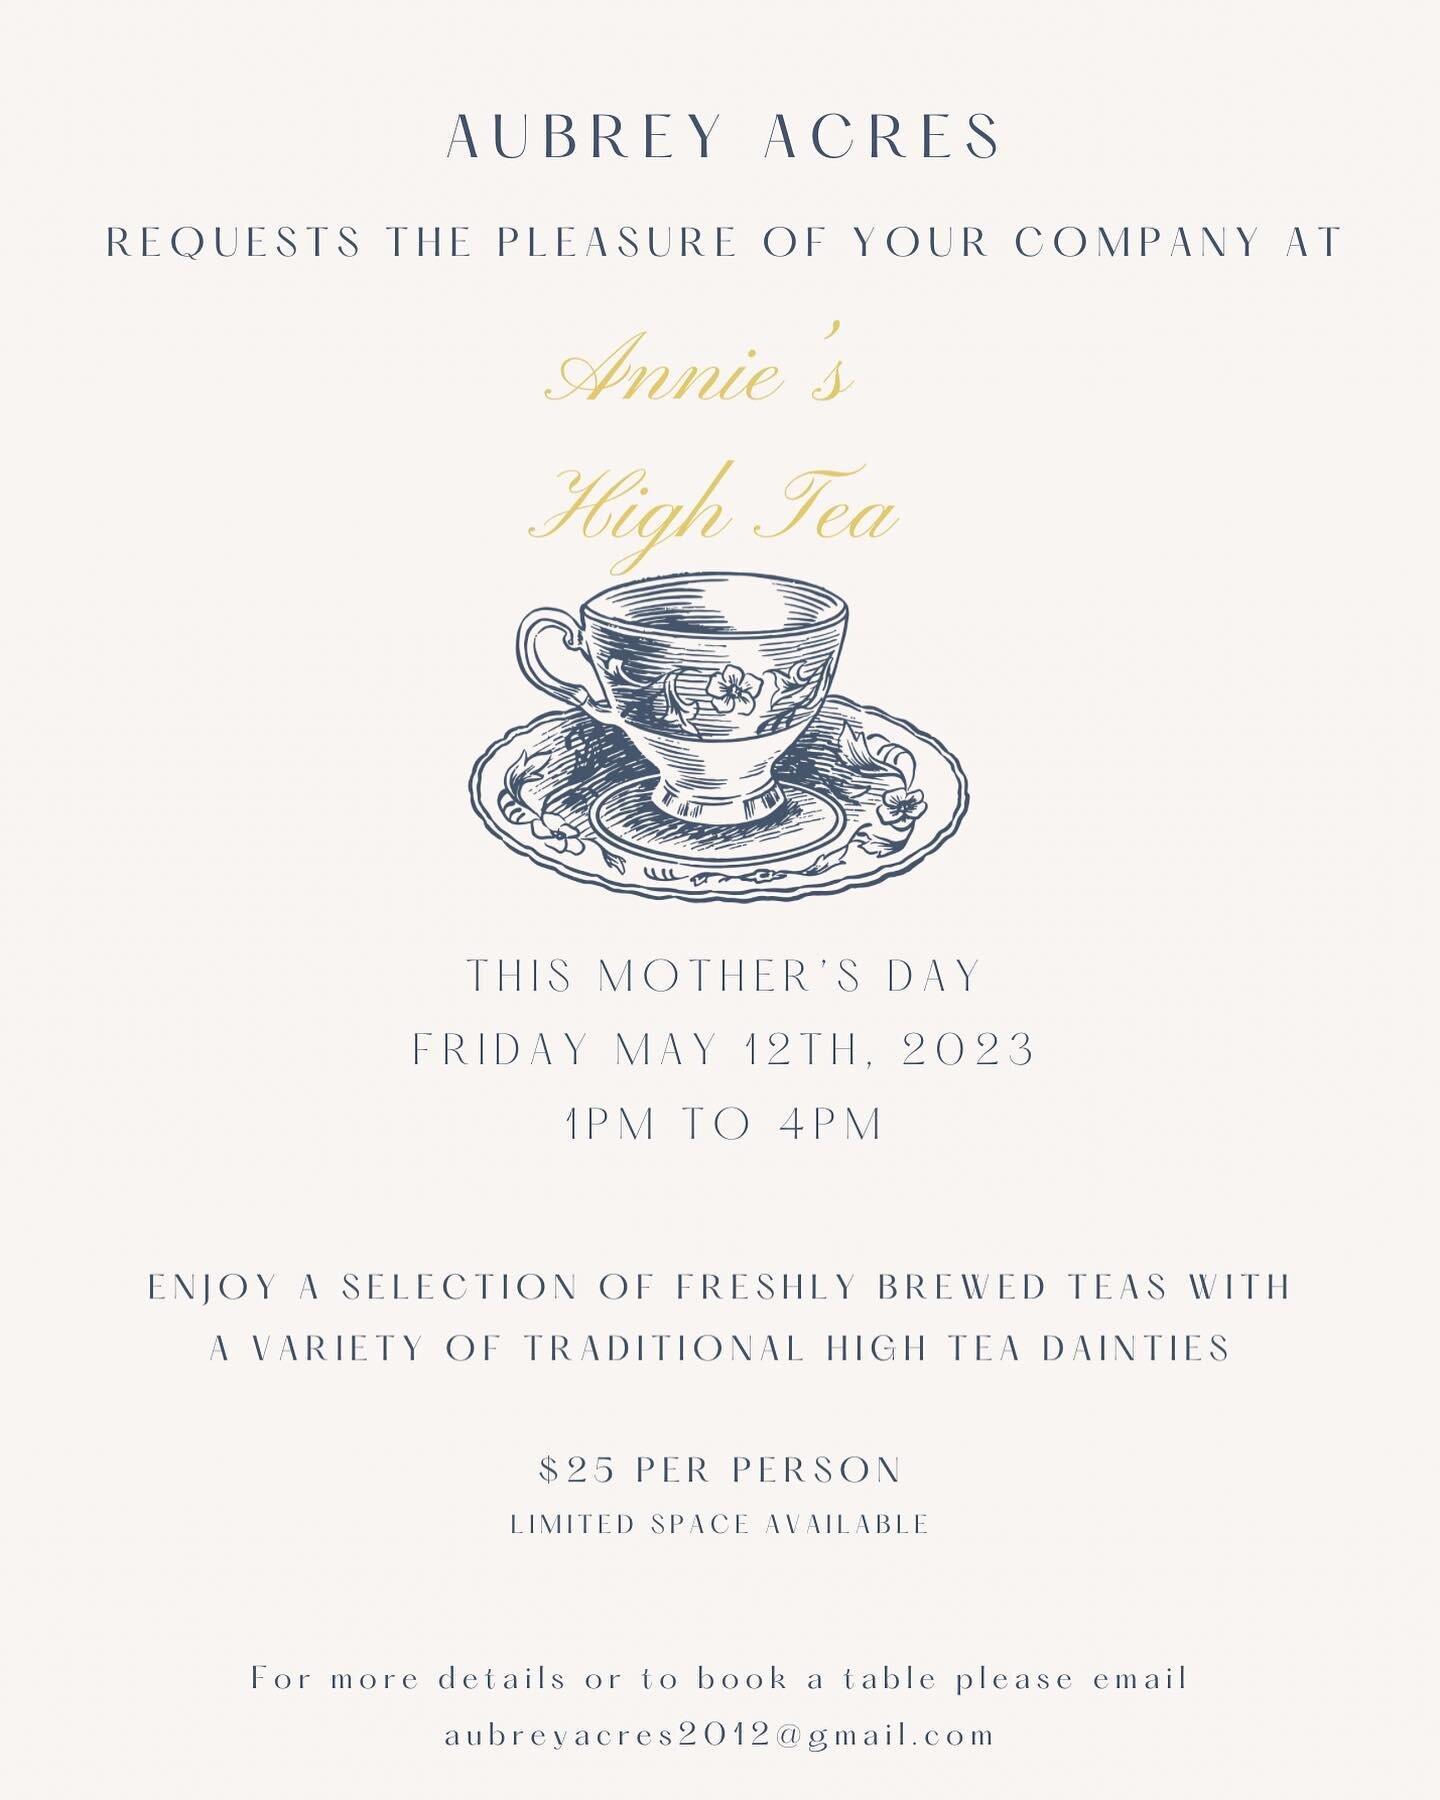 Come join us for a cuppa this Mother&rsquo;s Day!

Dressing for the era is optional😉